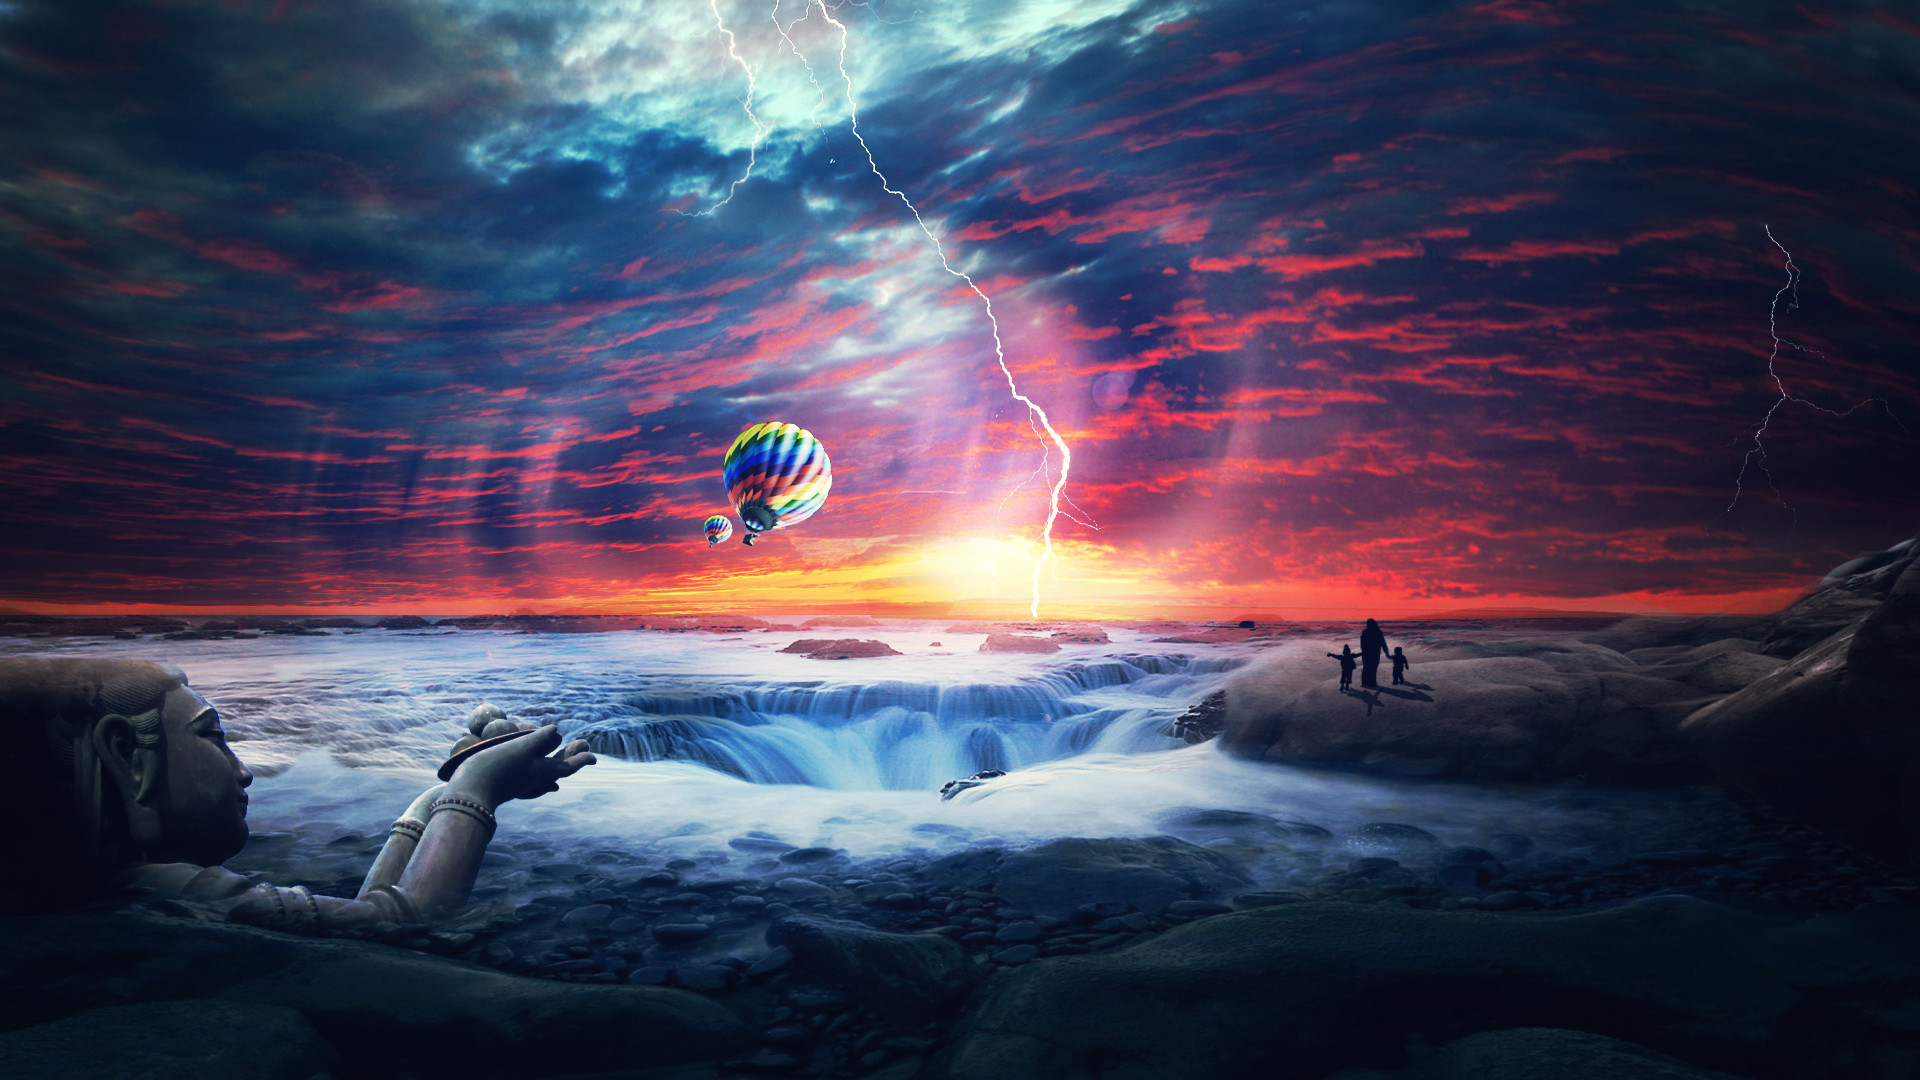 1920x1080 Heaven Sunset Sea Airballons Wallpapers HD Wallpapers 